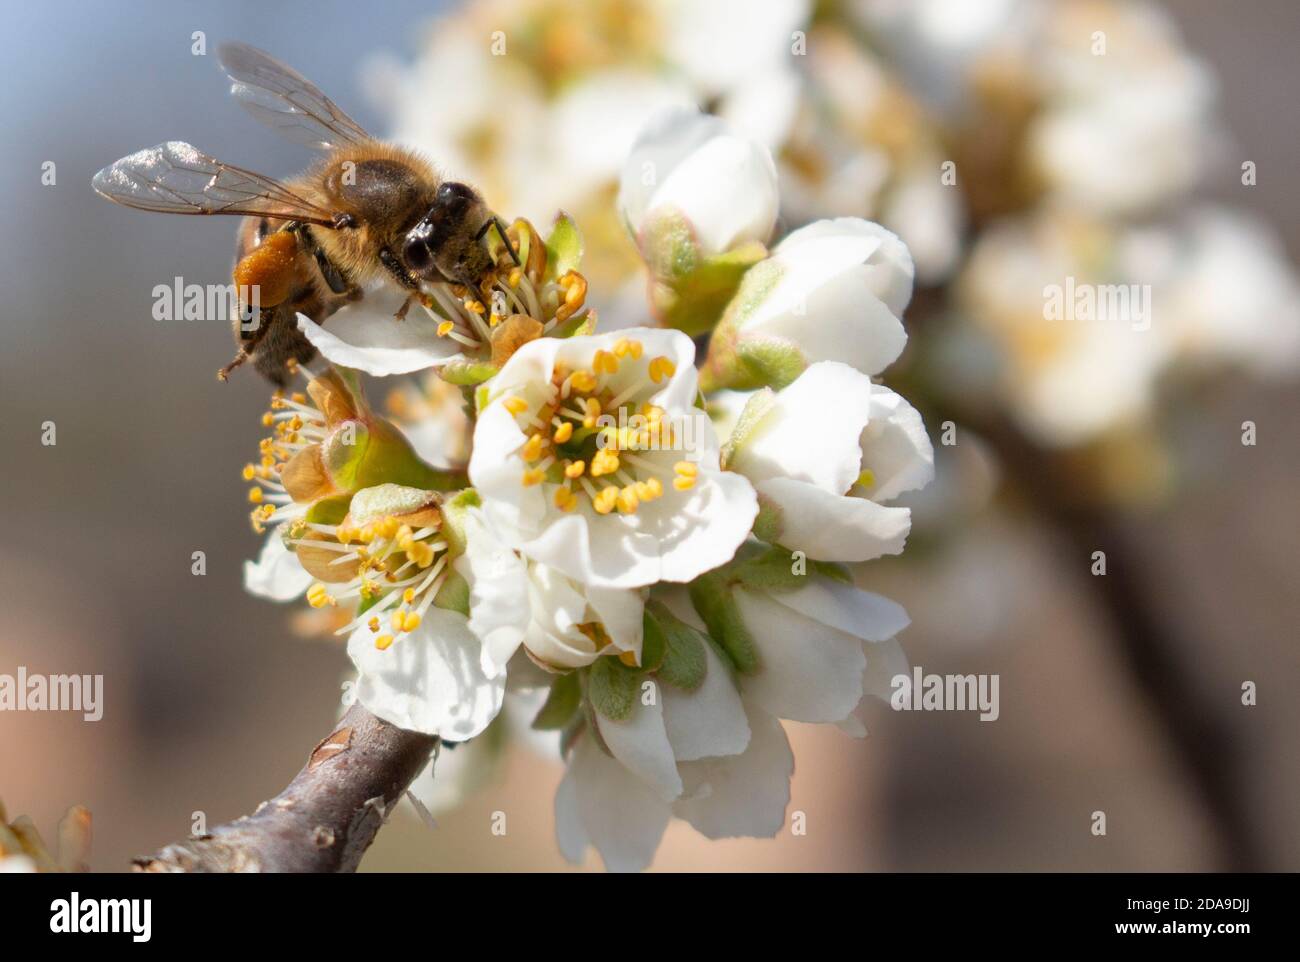 Beekeeping as a business, spring harvesting of honey from plum blossoms. Stock Photo